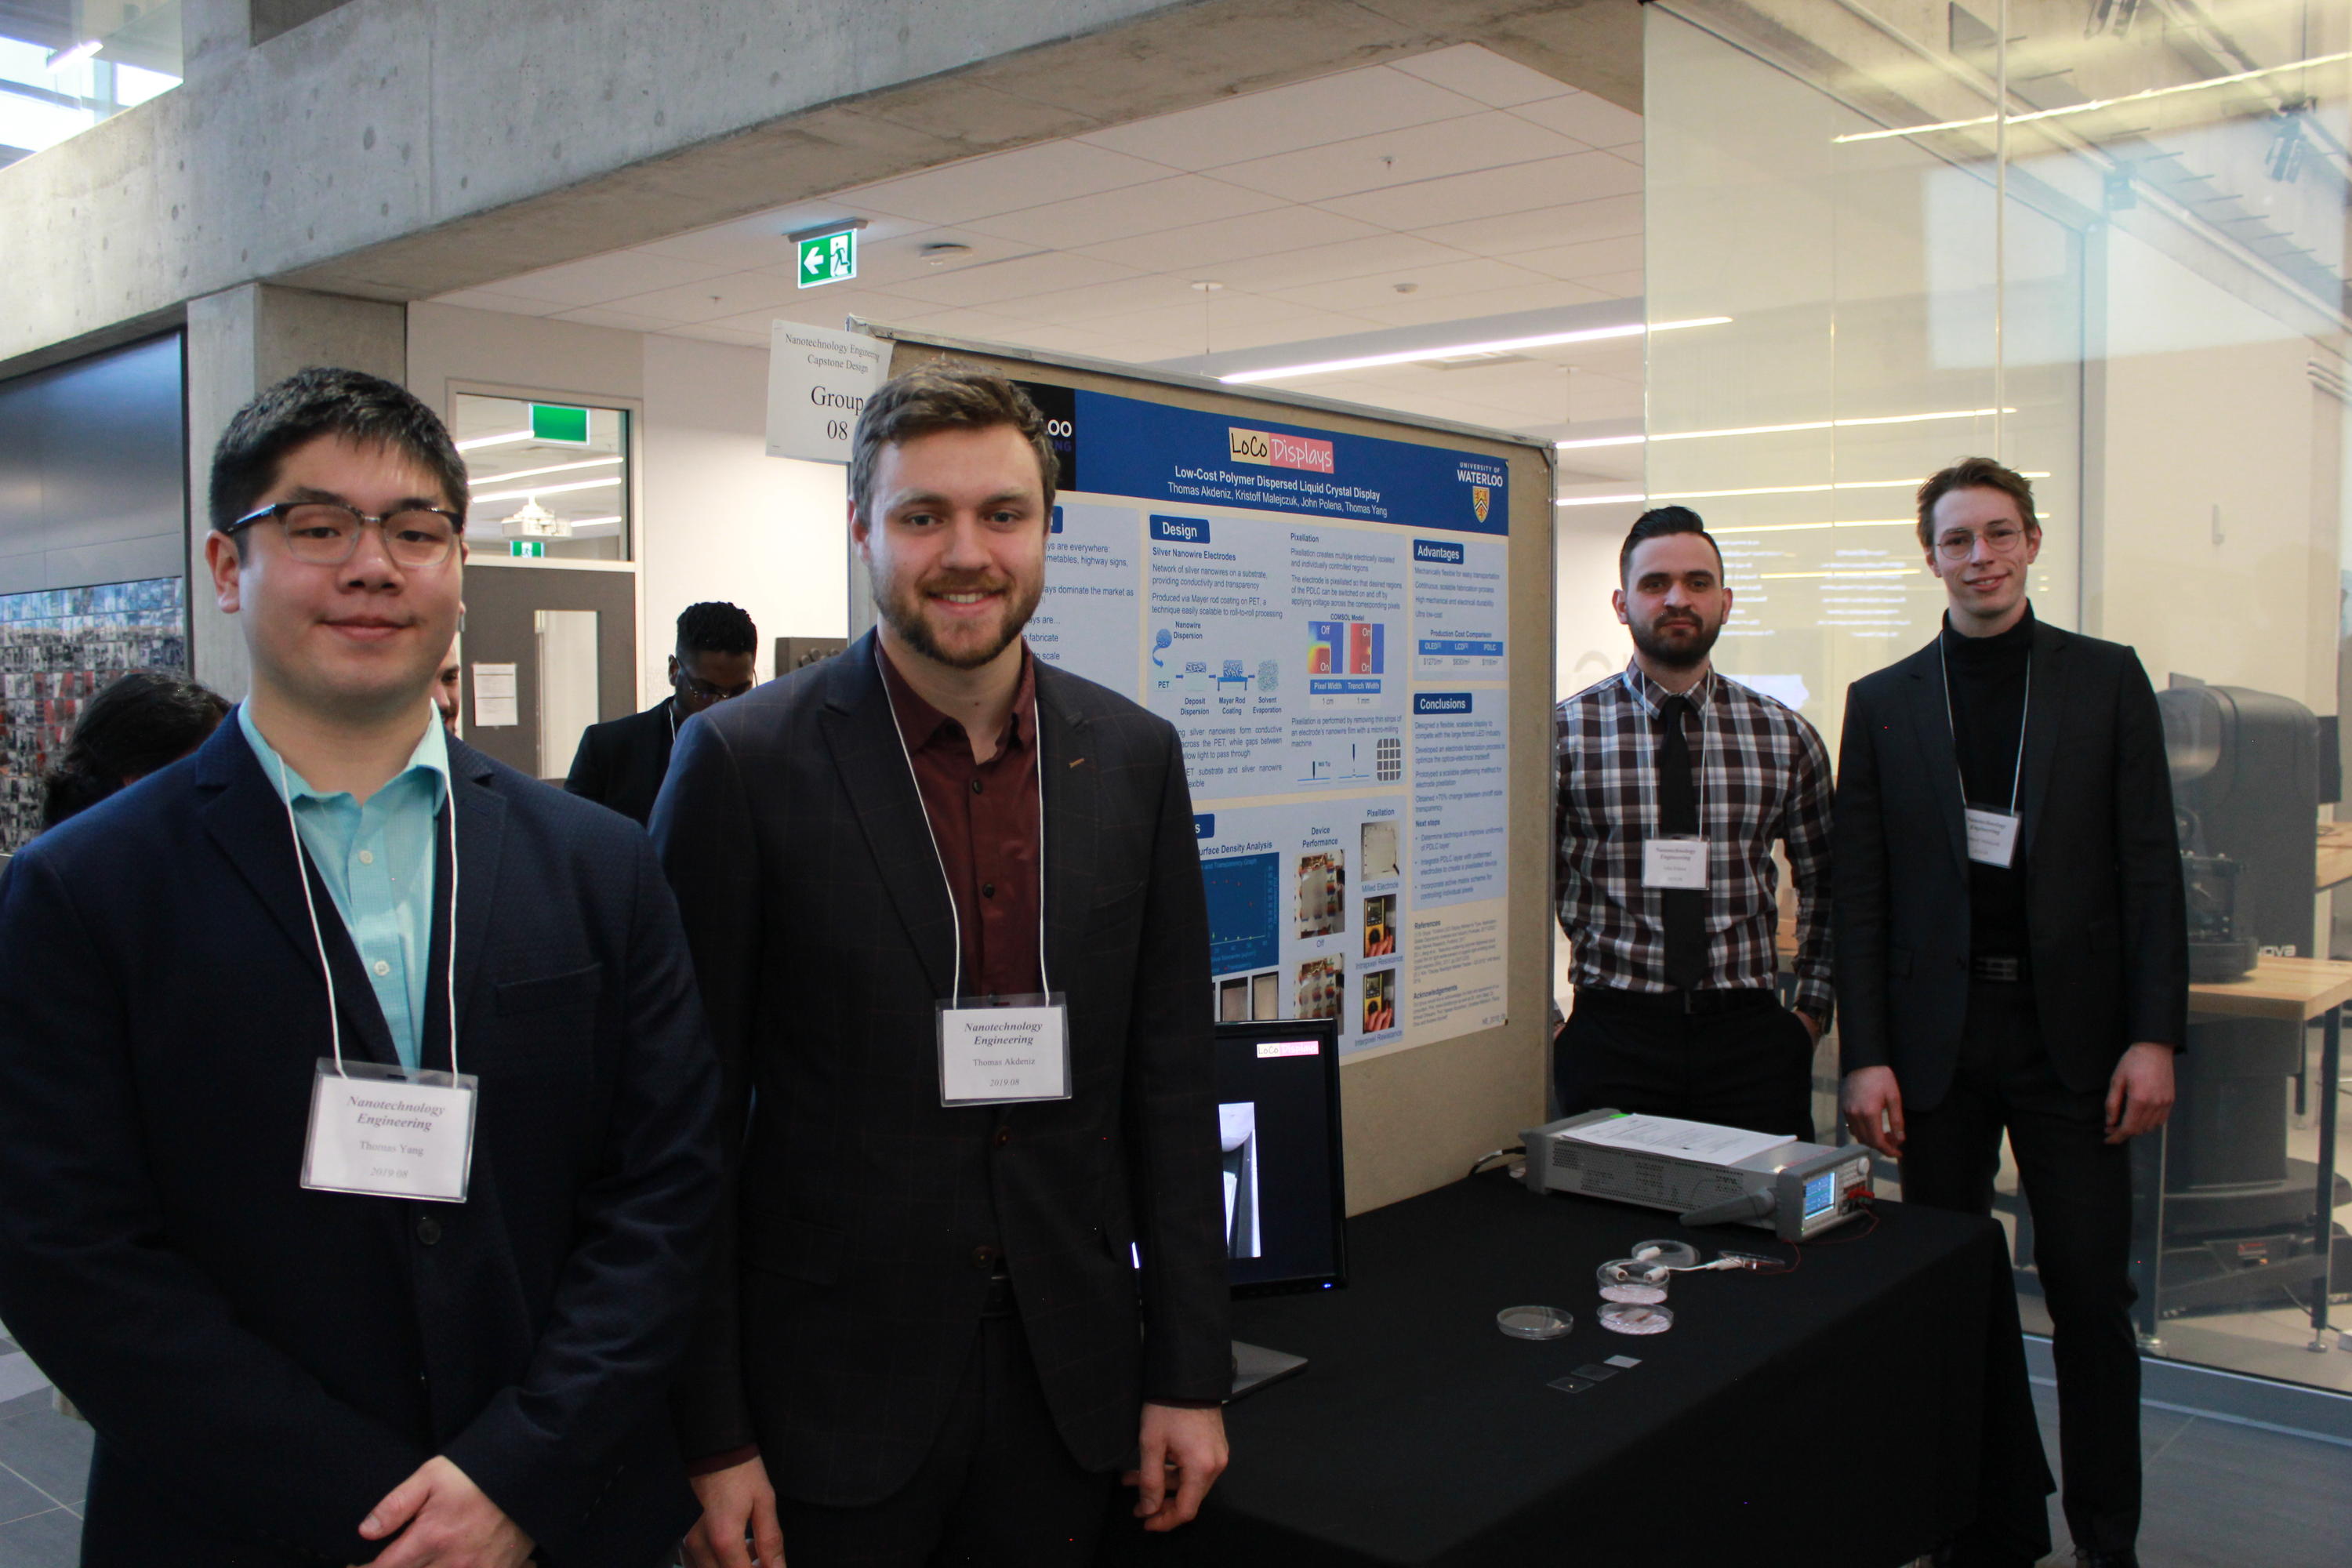 Team 8 students with their project poster at the 2019 Capstone Design Symposium.